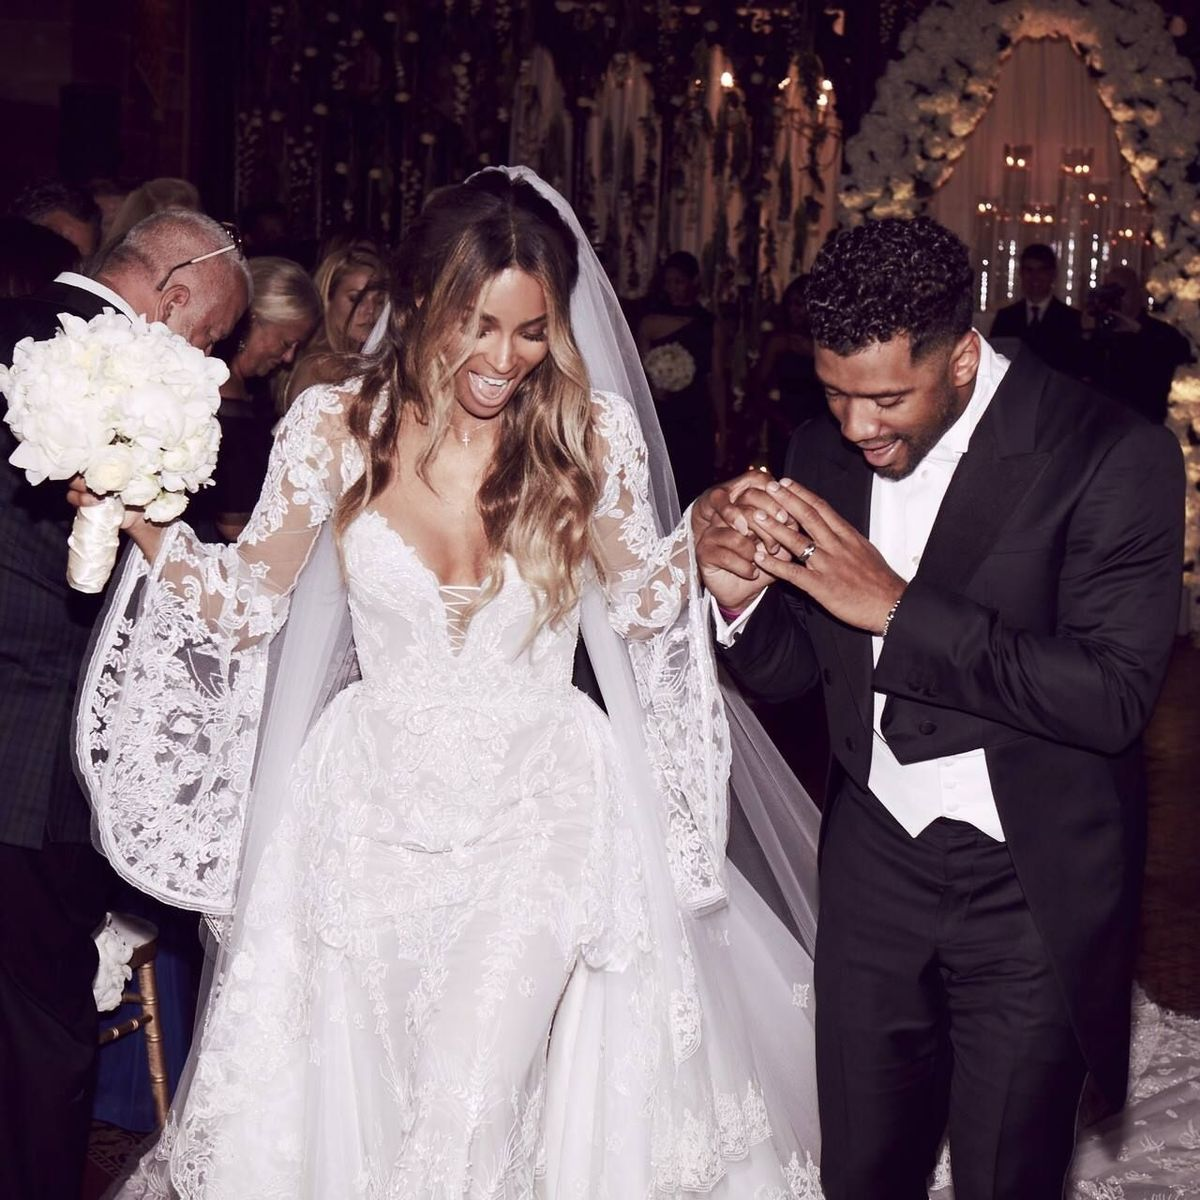 Stunning couple Ciara and Russell Wilson's destination wedding in Cheshire, England.